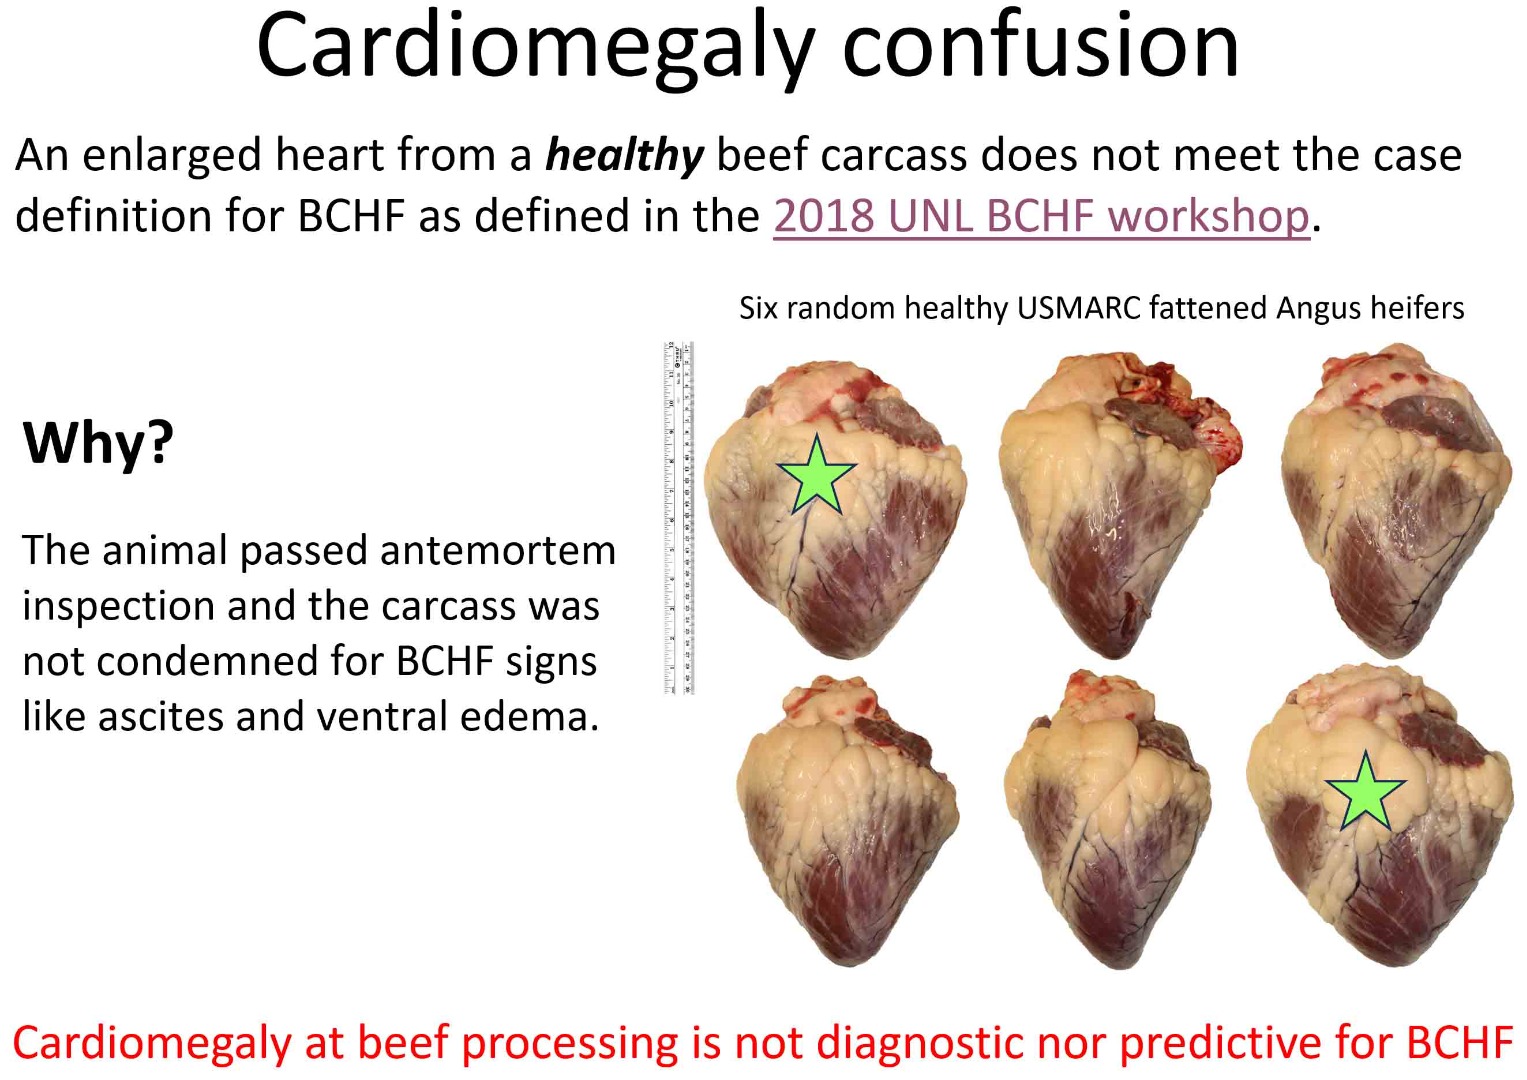 /ARSUserFiles/30400500/BCHF_photos/Cardiomegaly6AngusHeifers250k.jpg